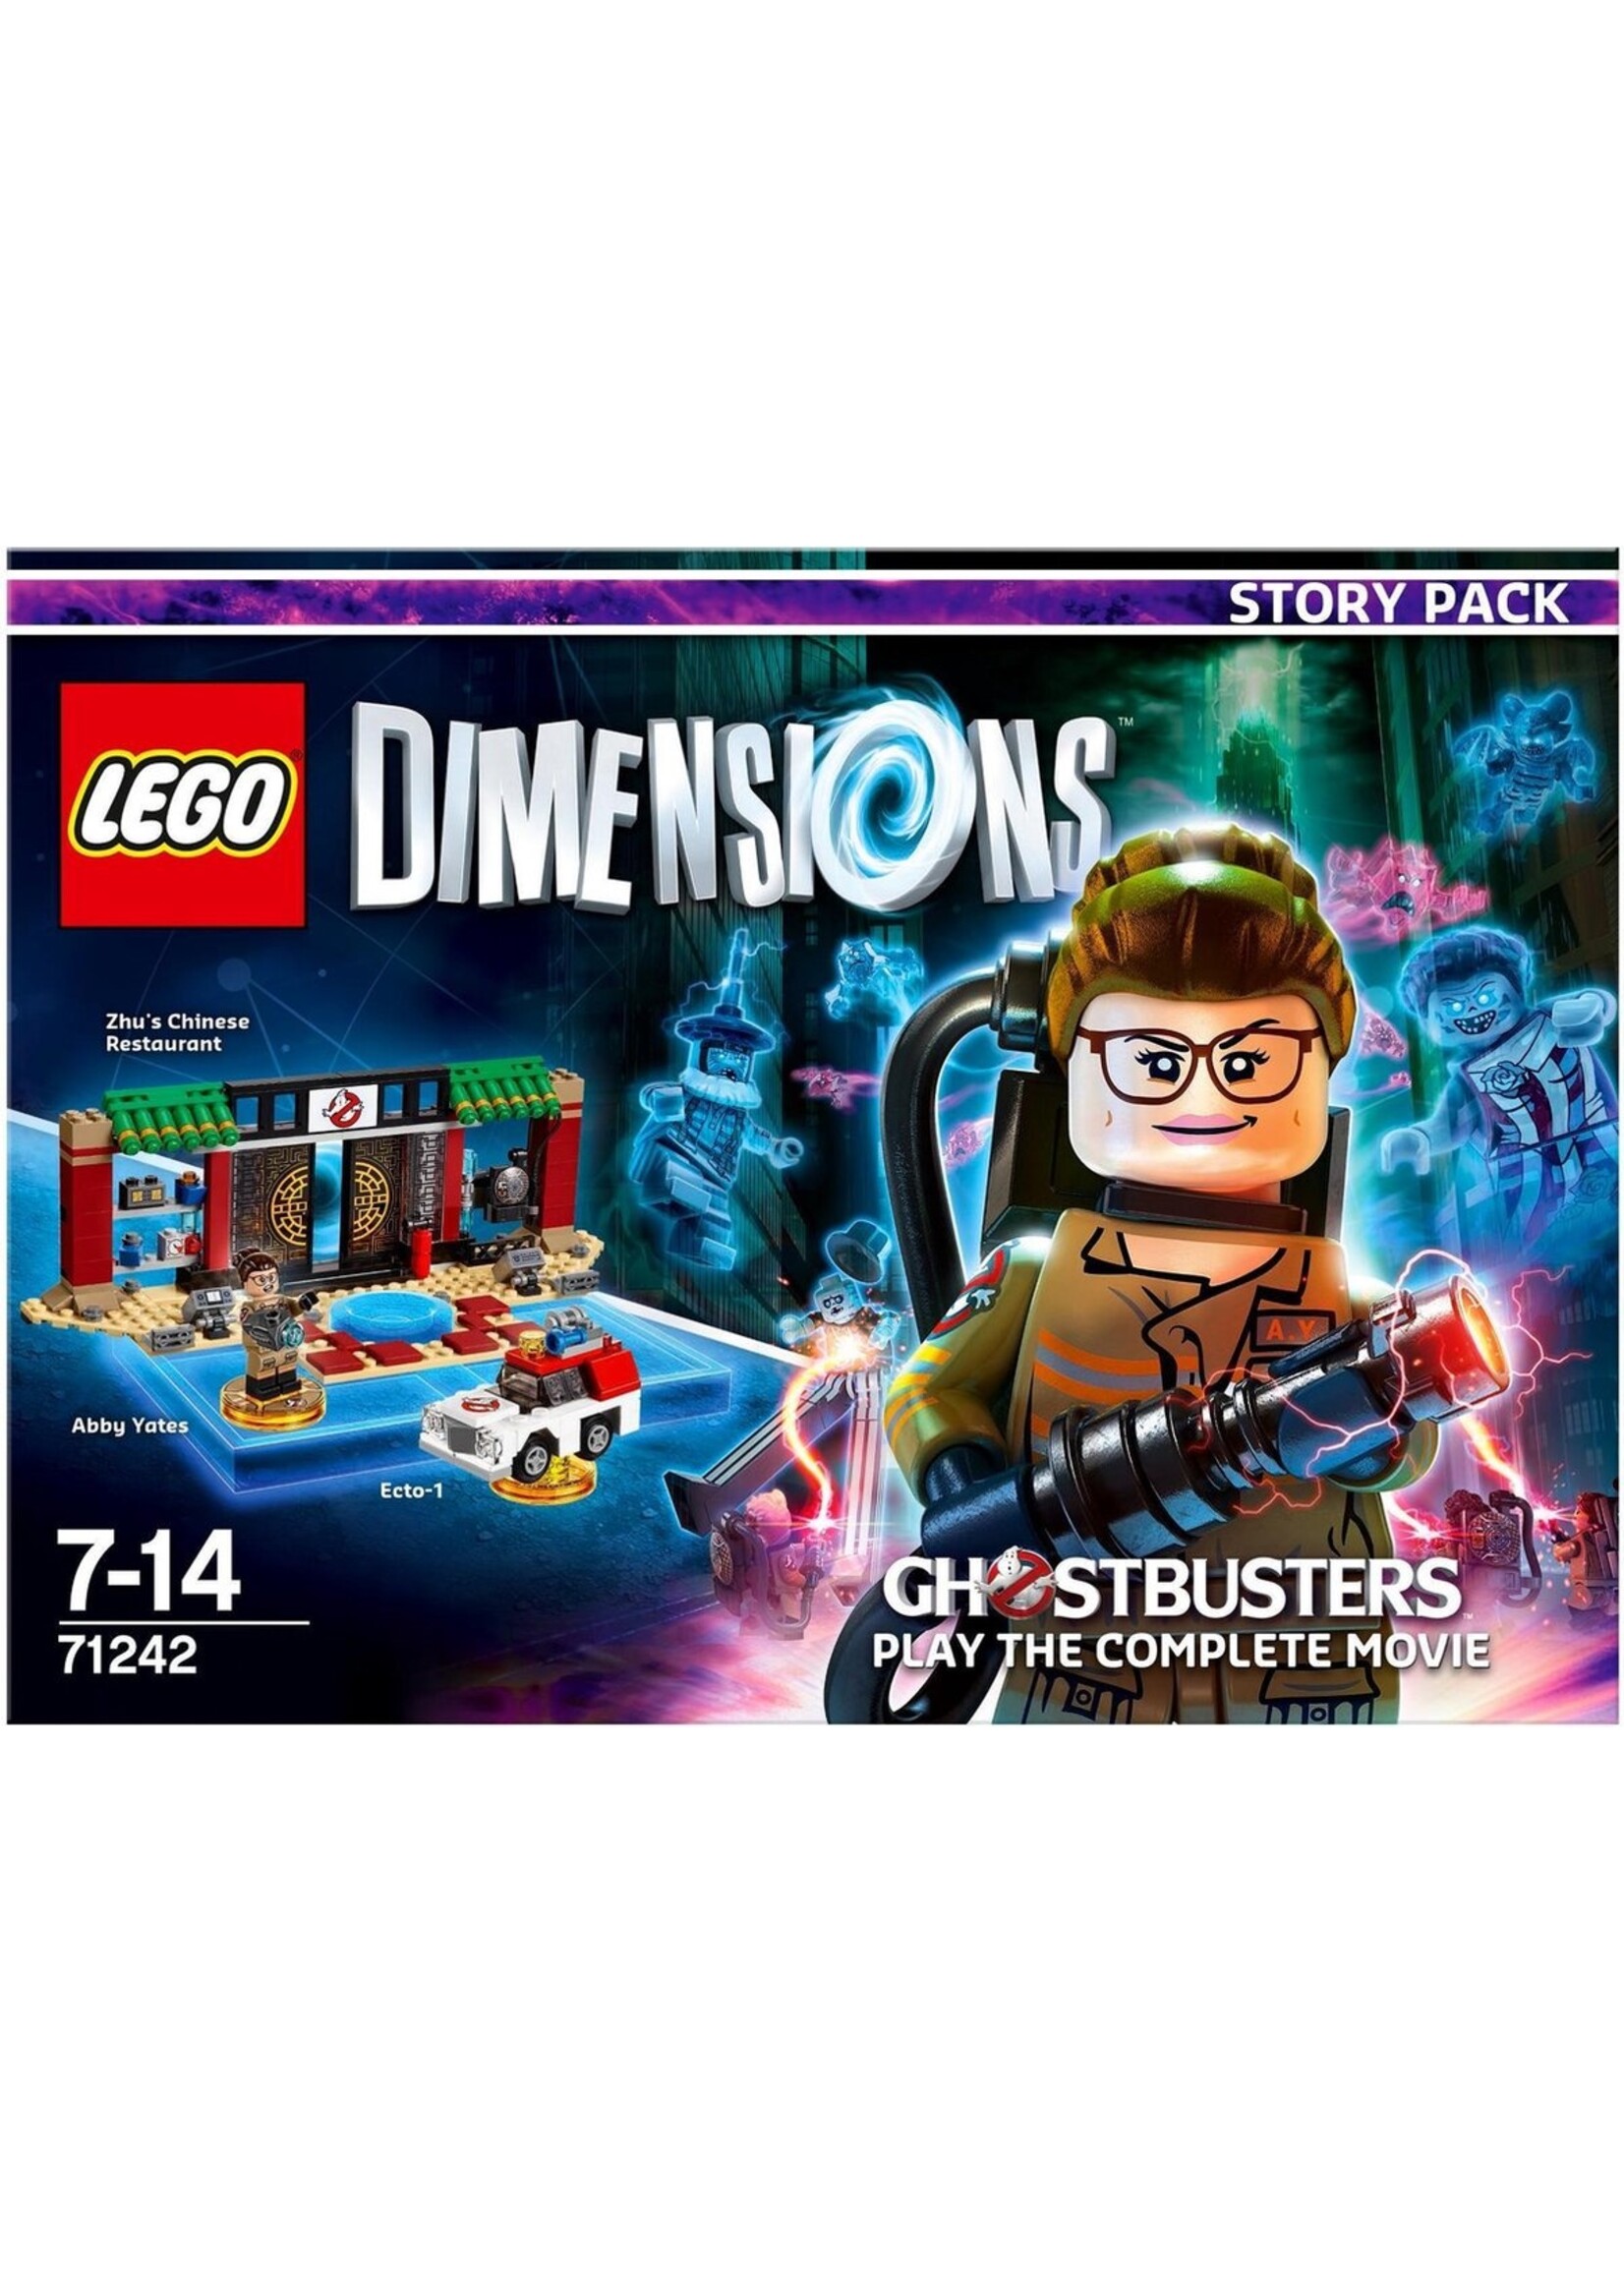 LEGO Dimensions - Story Pack - Ghostbusters (Multiplatform) 71242